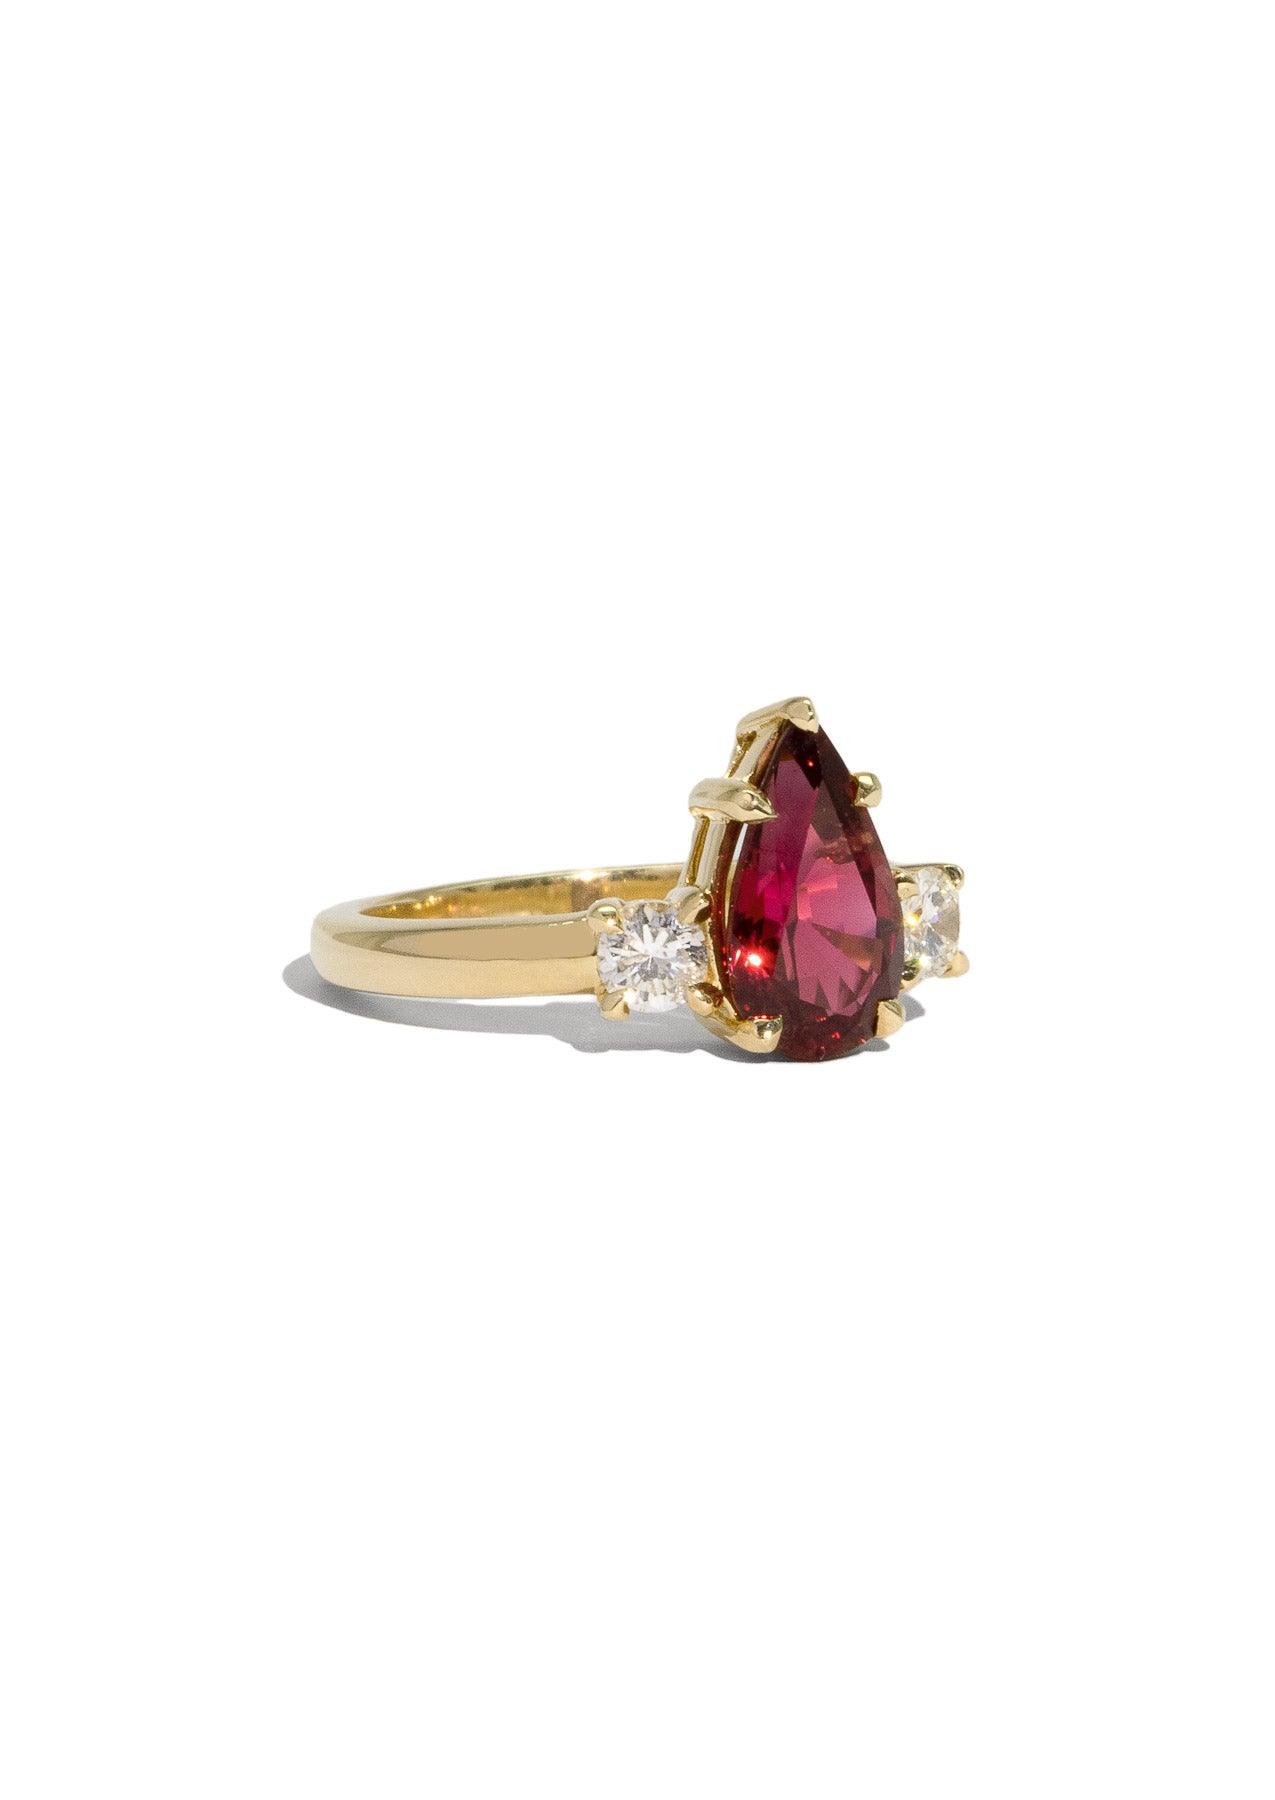 The Ada 1.91ct Cherry Spinel Ring